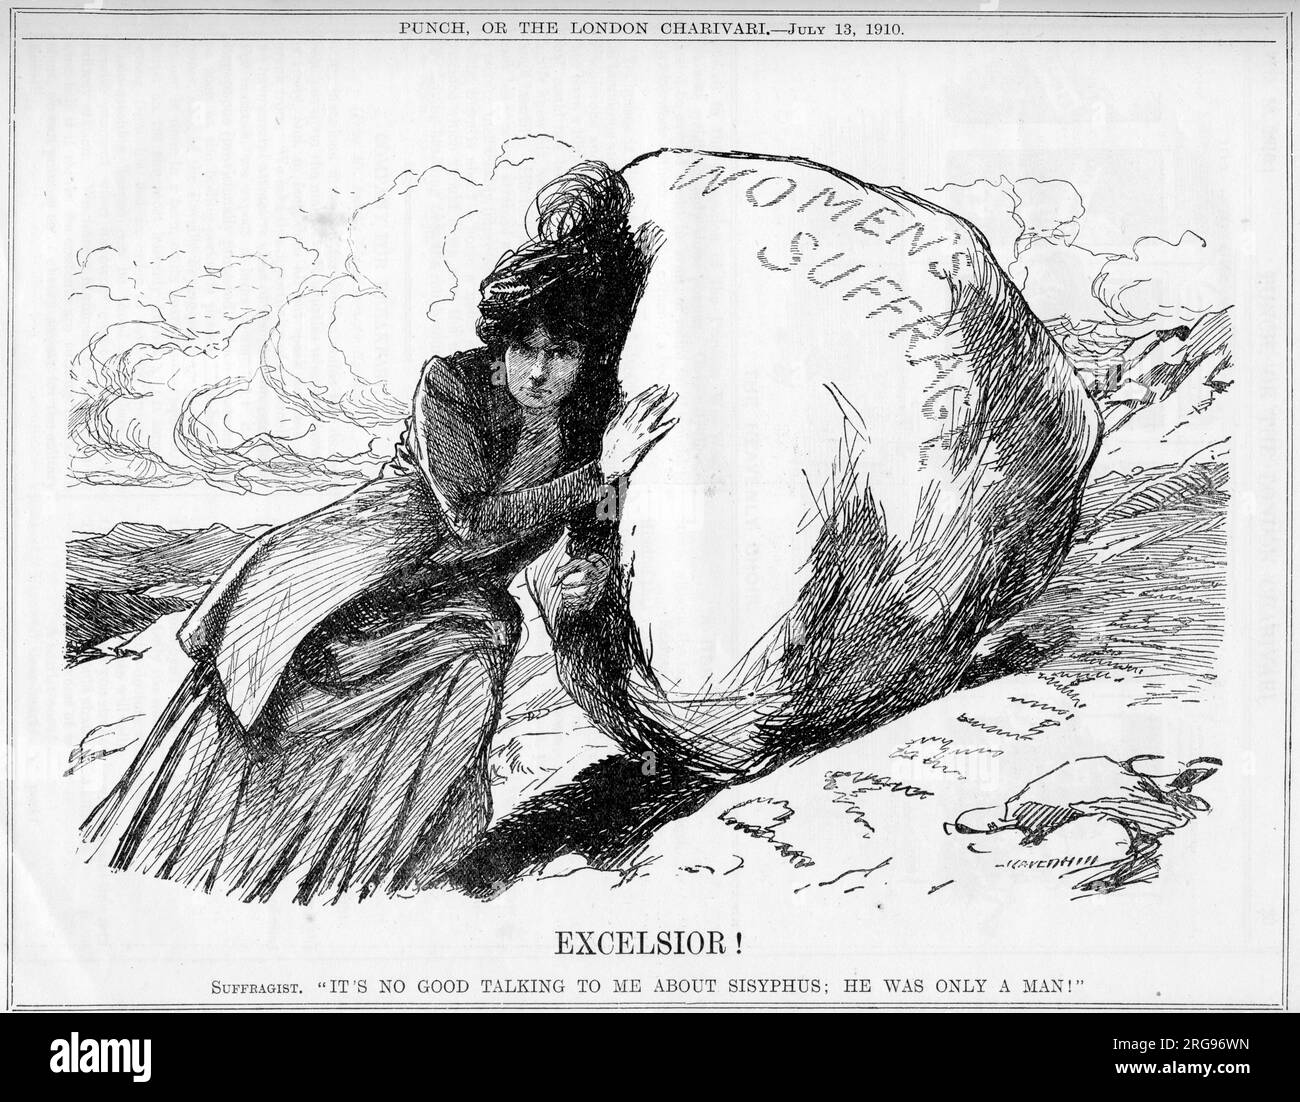 Cartoon, Excelsior! A Suffragette depicted as Sisyphus pushing the large boulder of Women's Suffrage up the 'Parliament' Hill. 'It's no good talking to me about Sisyphus; he was only a Man!' Stock Photo